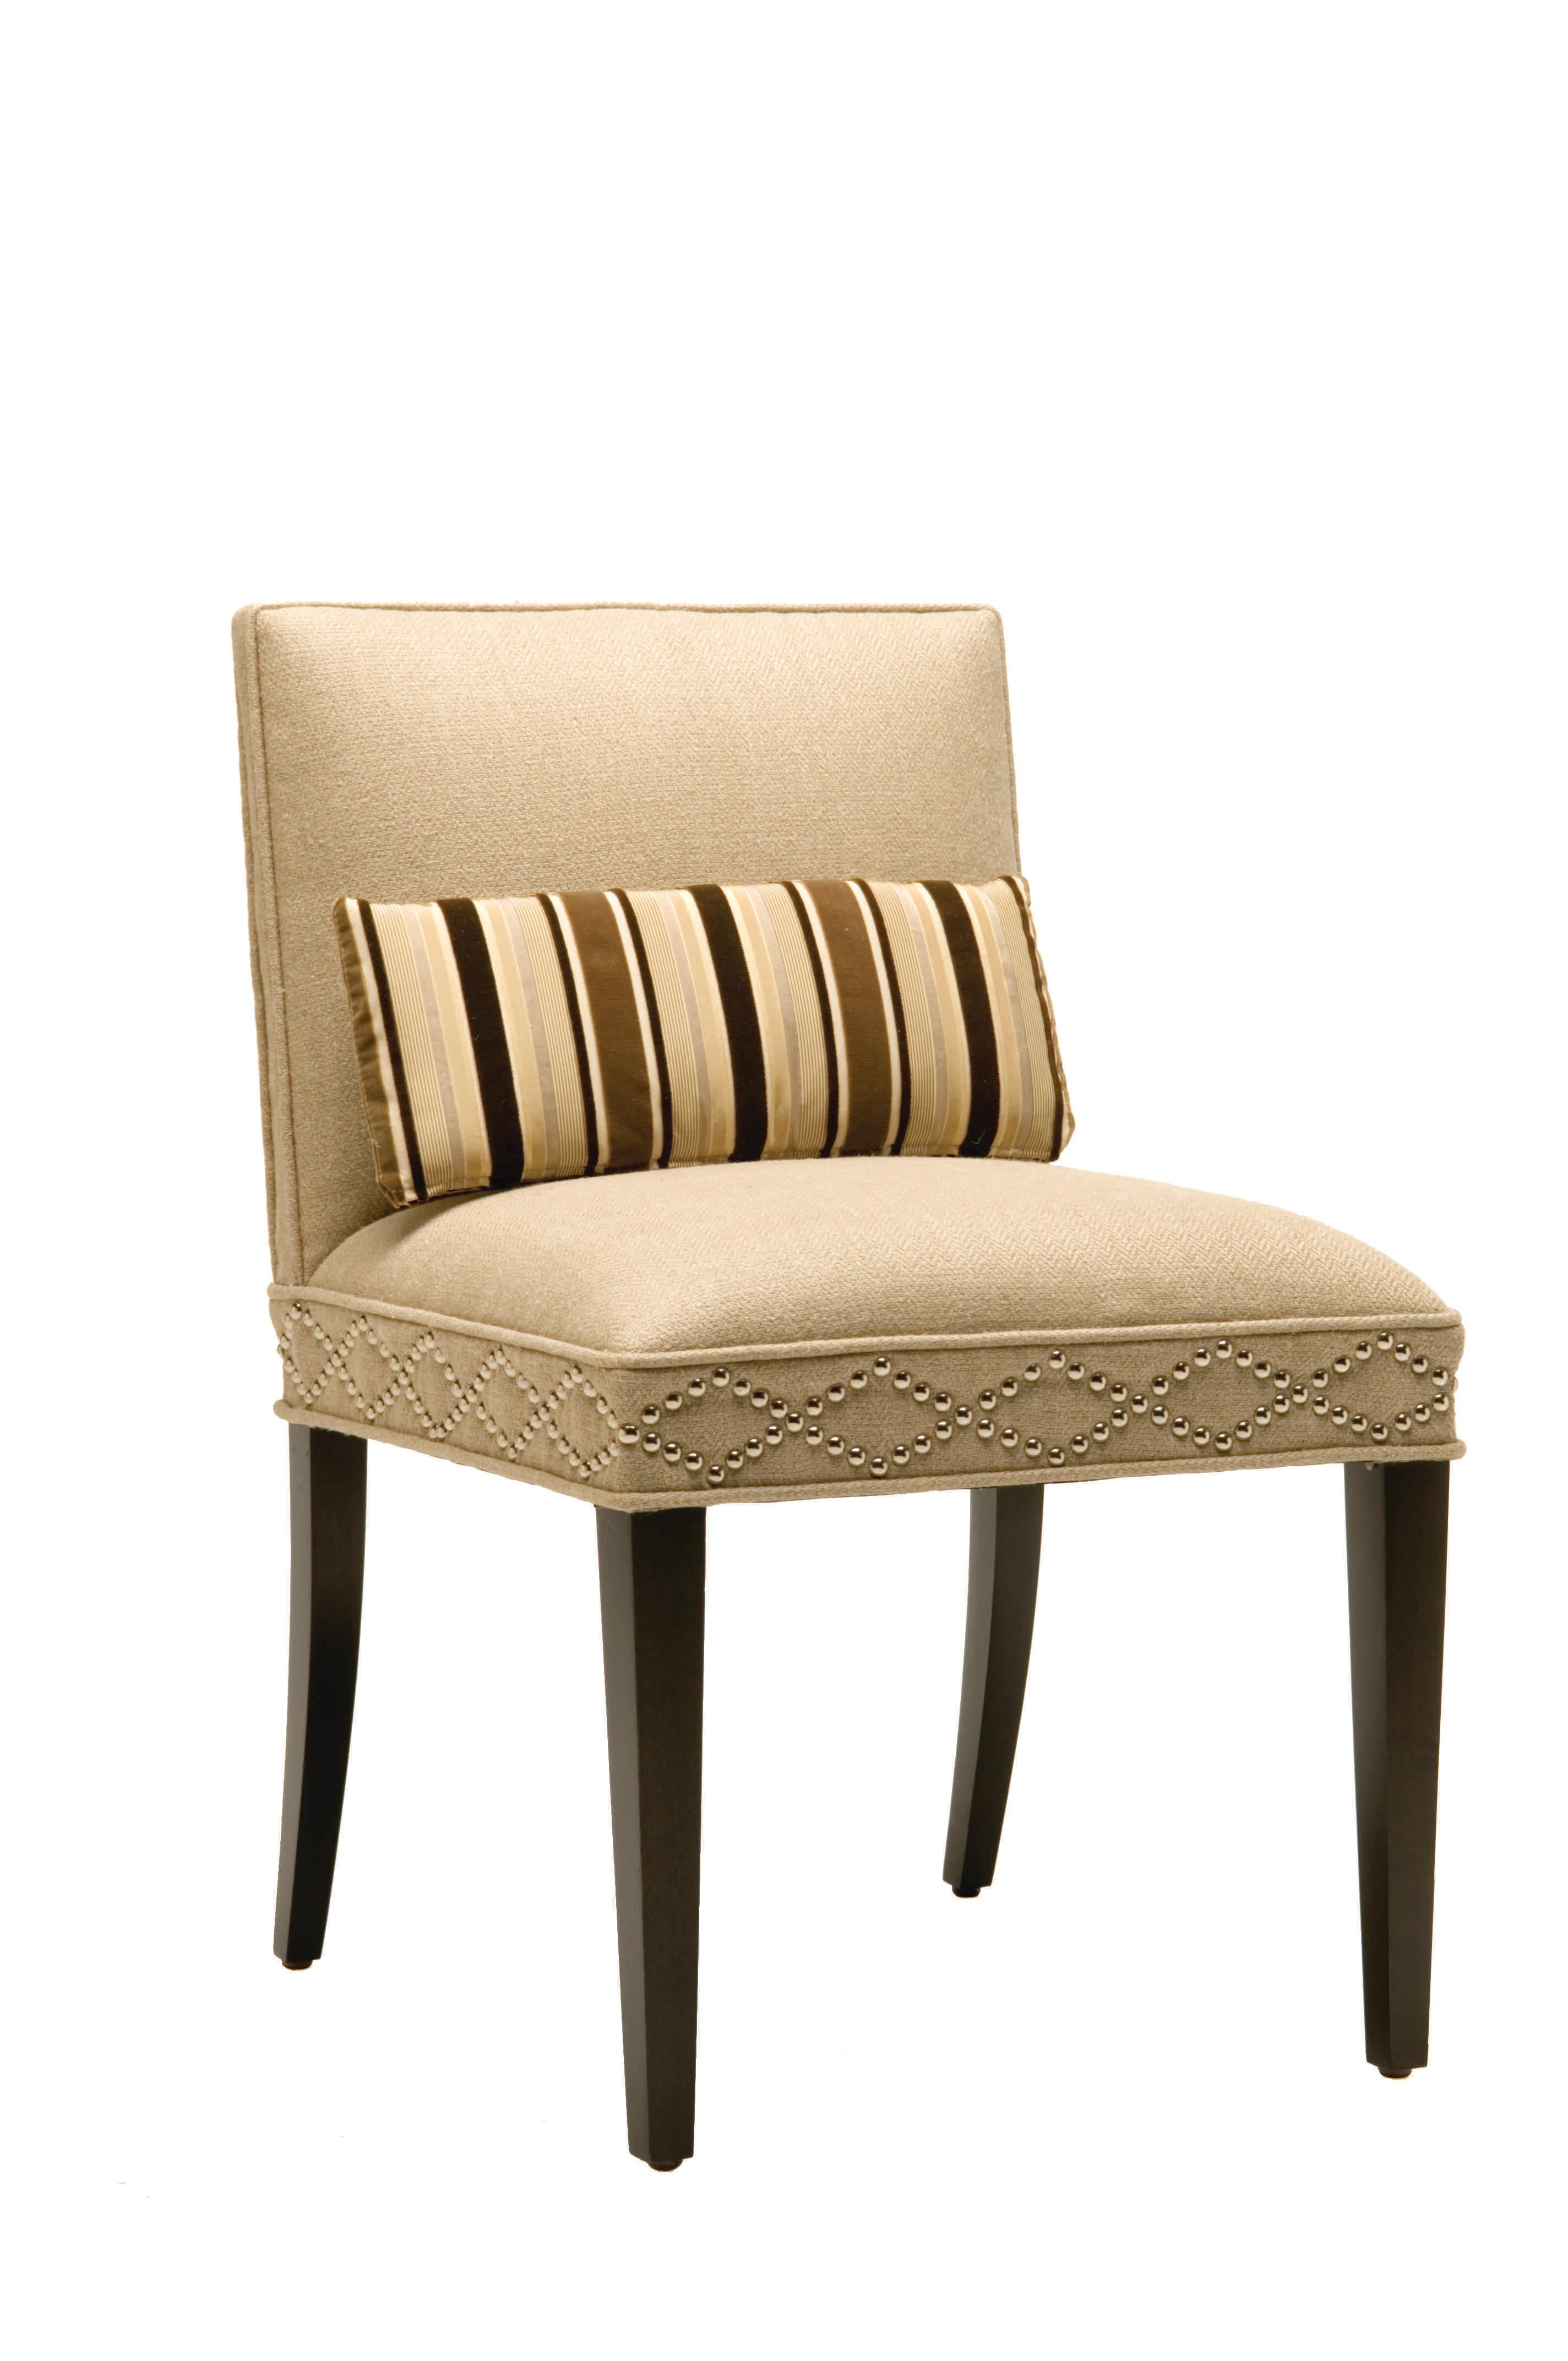 A hand-crafted tailored side chair inspired by the neo-classical movement of the 1940s. Features contrast nail trim. Custom sizes, finishes and contrast lumbar pillow available. Custom design nail trims available upon request. We have 2 available